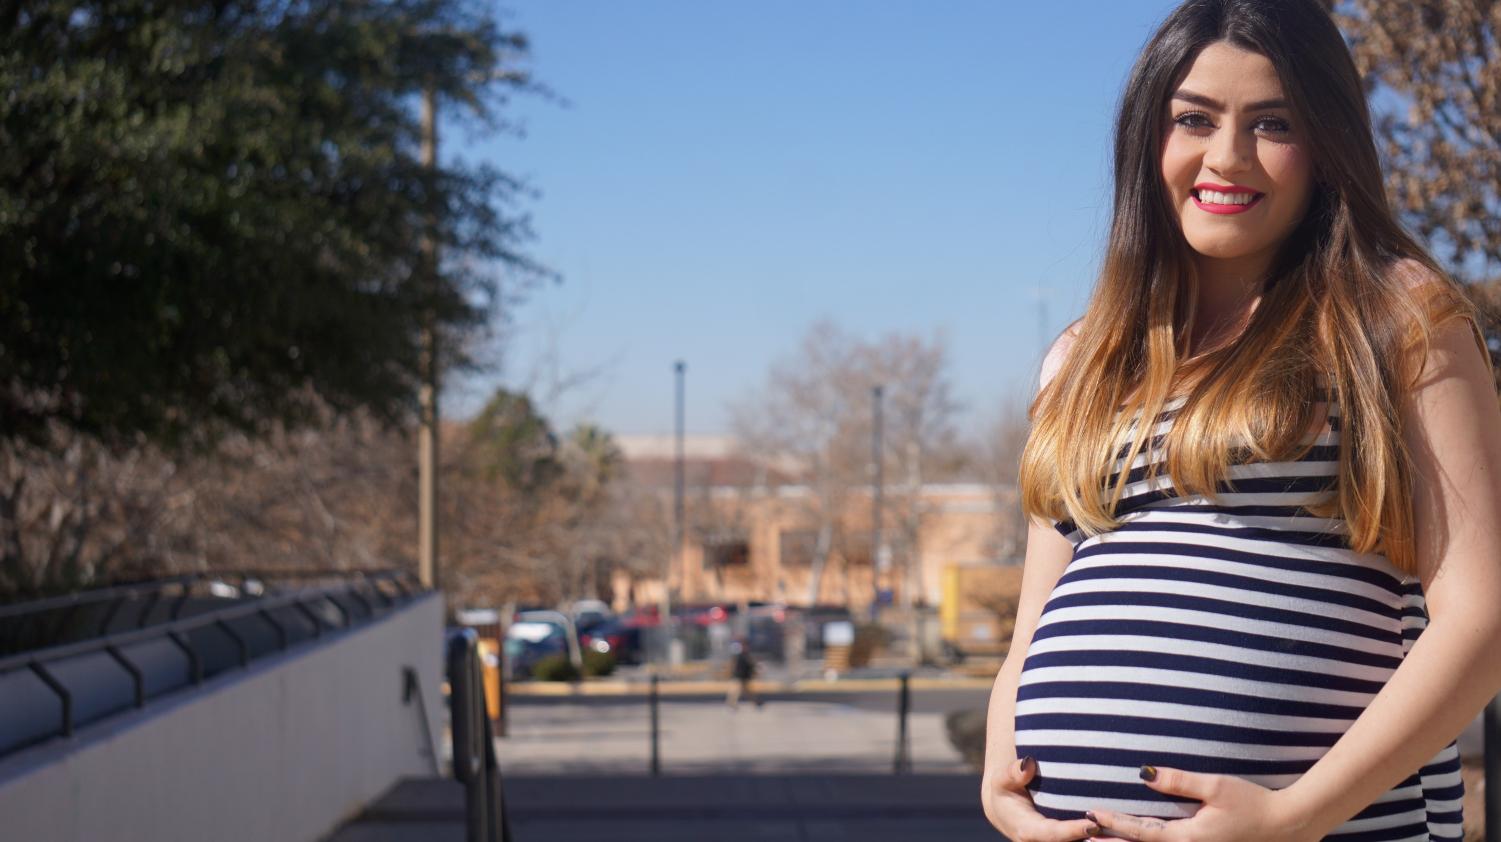 Zeylah Galindo, a student at NMSU, poses with her baby bump. Galindo is due to give birth next month.